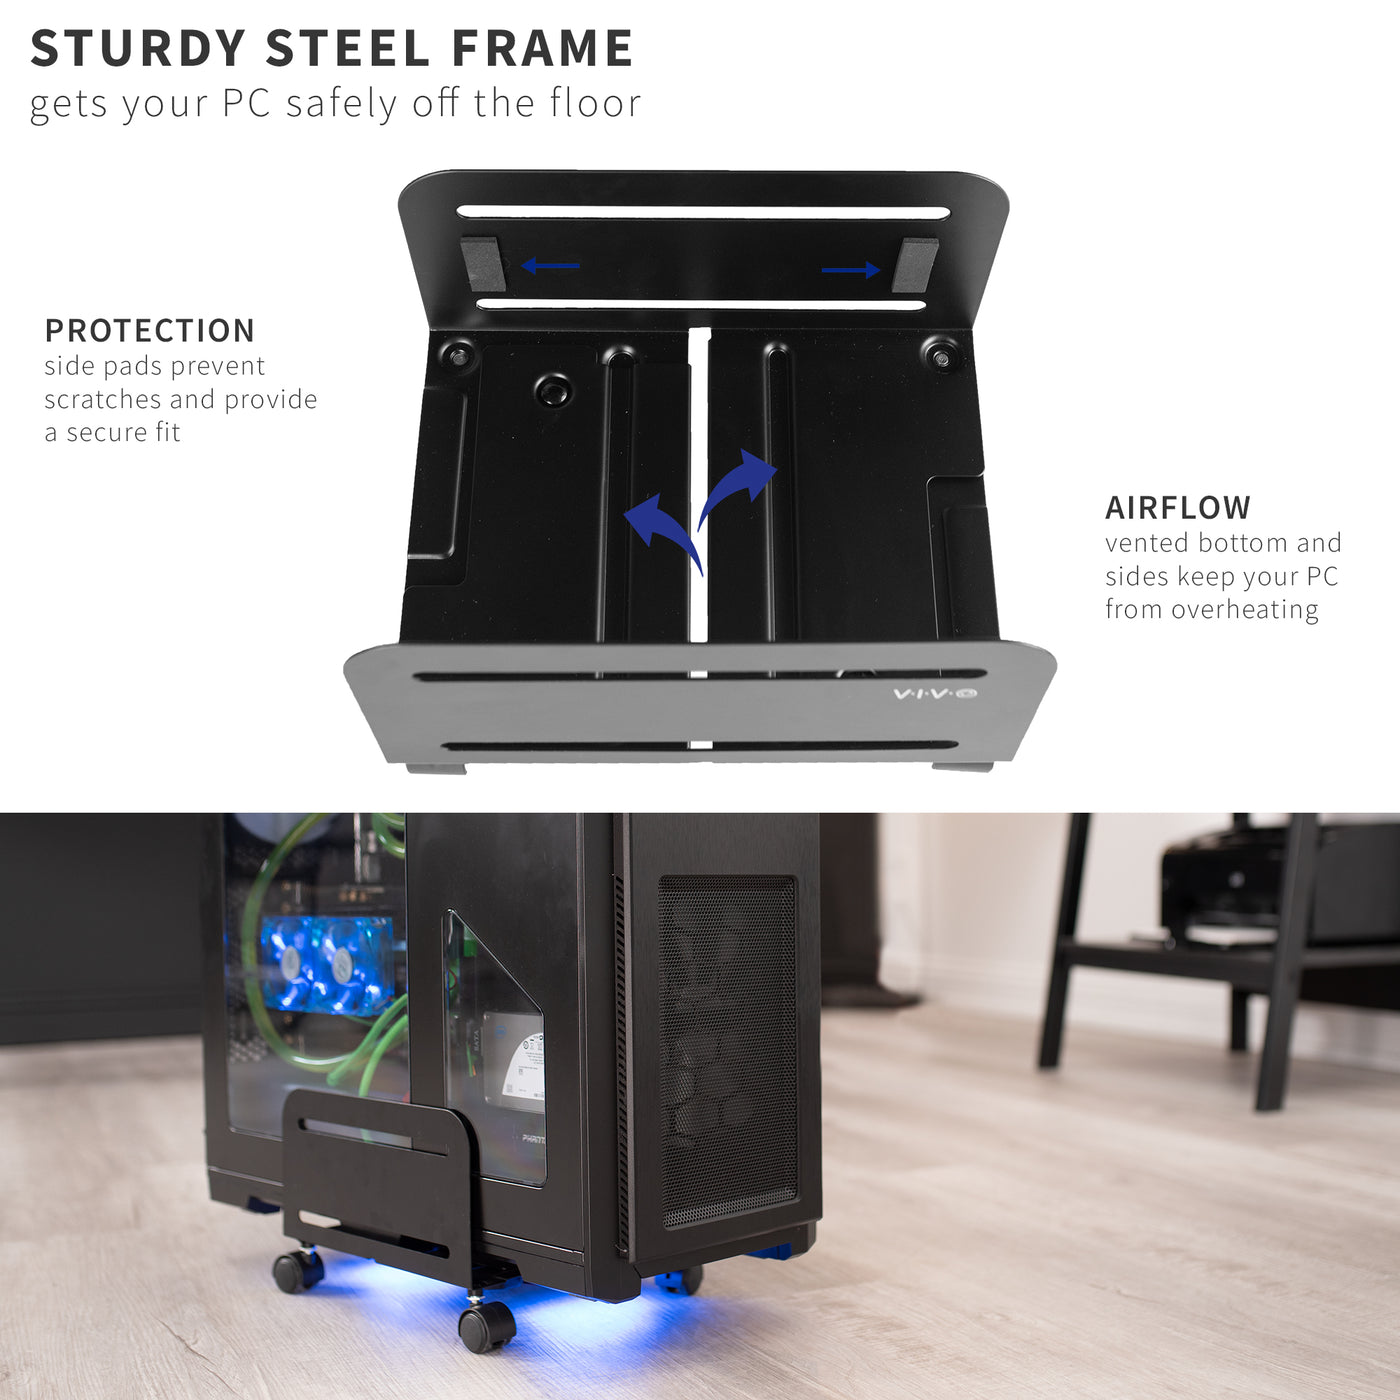  Large Computer Tower Desktop ATX-Case, CPU Steel Rolling Stand, 7.8 to 14 inch Wide Adjustable Mobile Cart Holder with Locking Caster Wheels, Gaming PC Holder